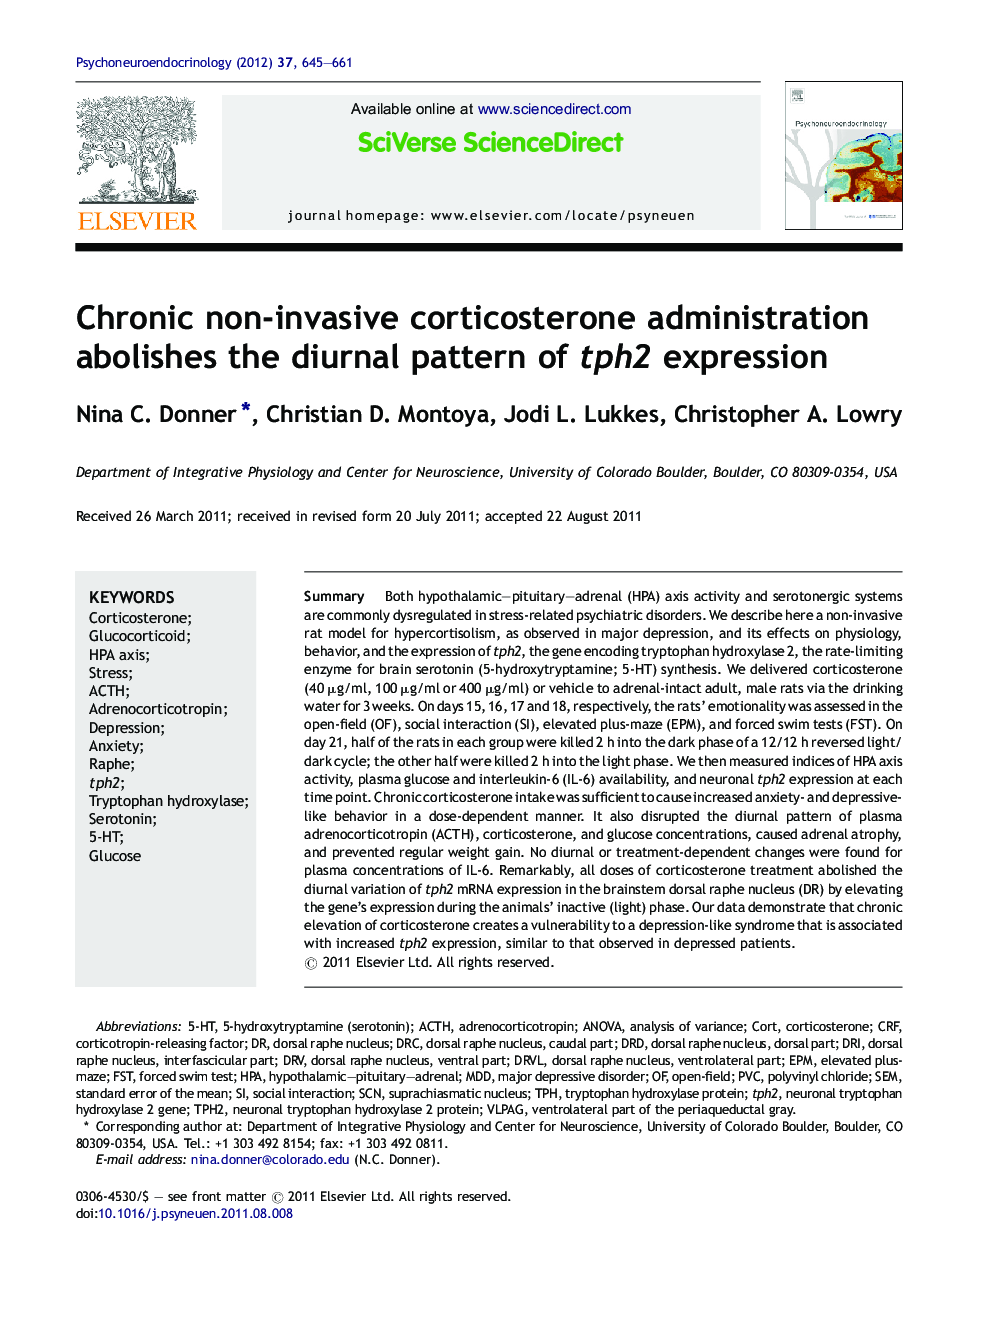 Chronic non-invasive corticosterone administration abolishes the diurnal pattern of tph2 expression